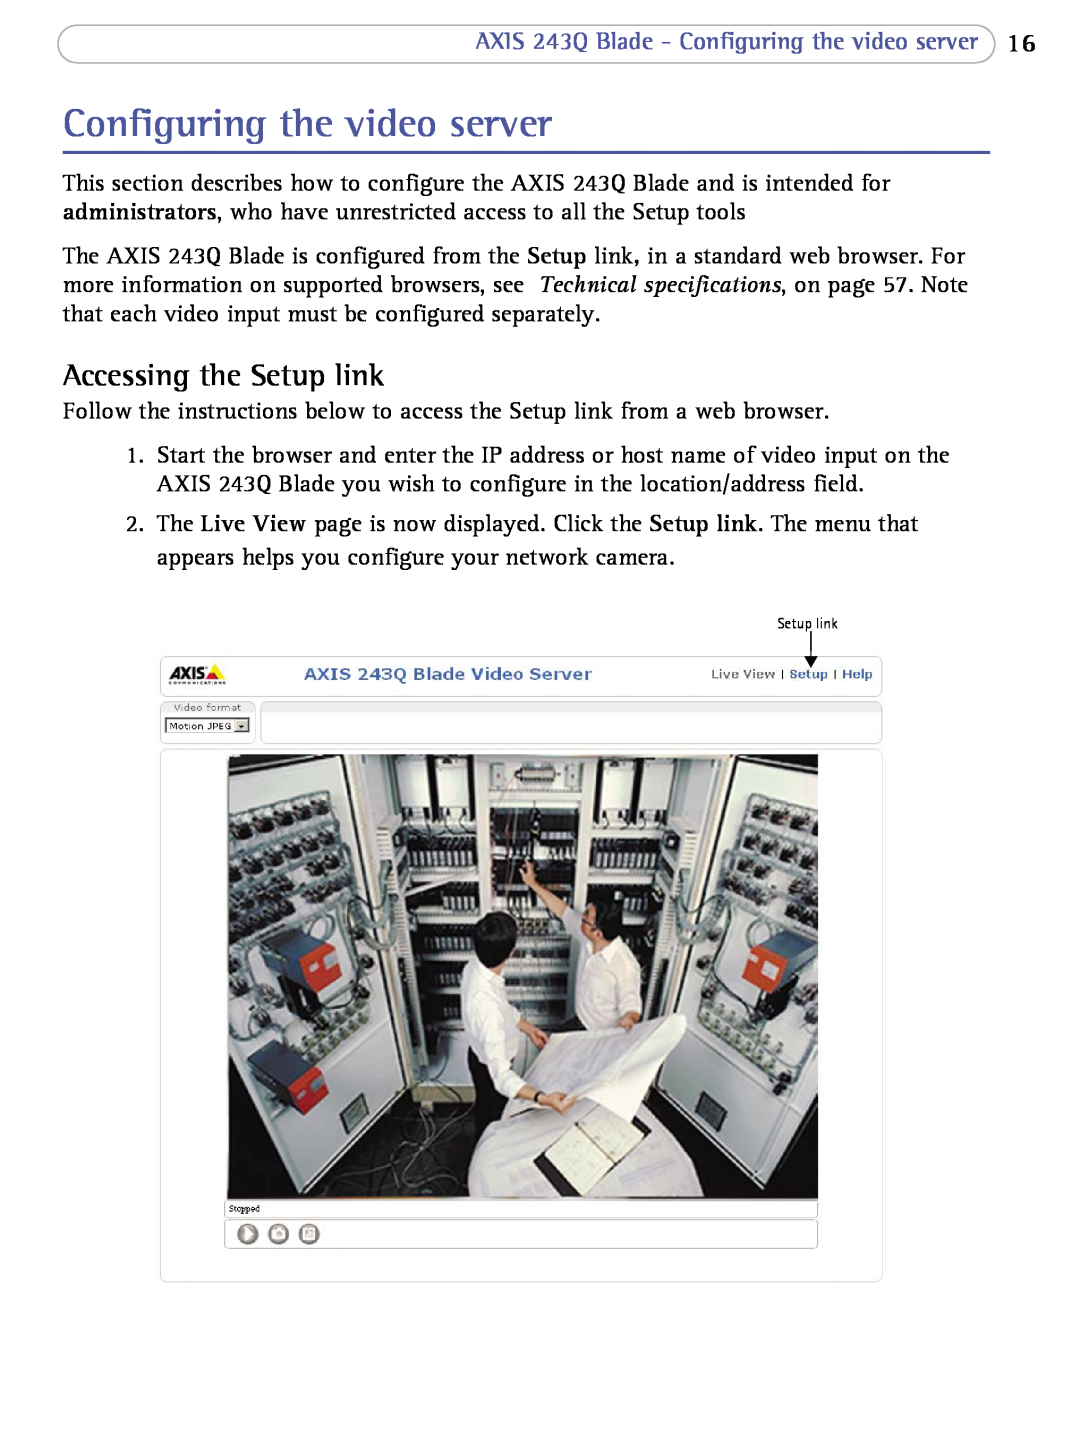 Axis Communications 243Q user manual Configuring the video server, Accessing the Setup link 